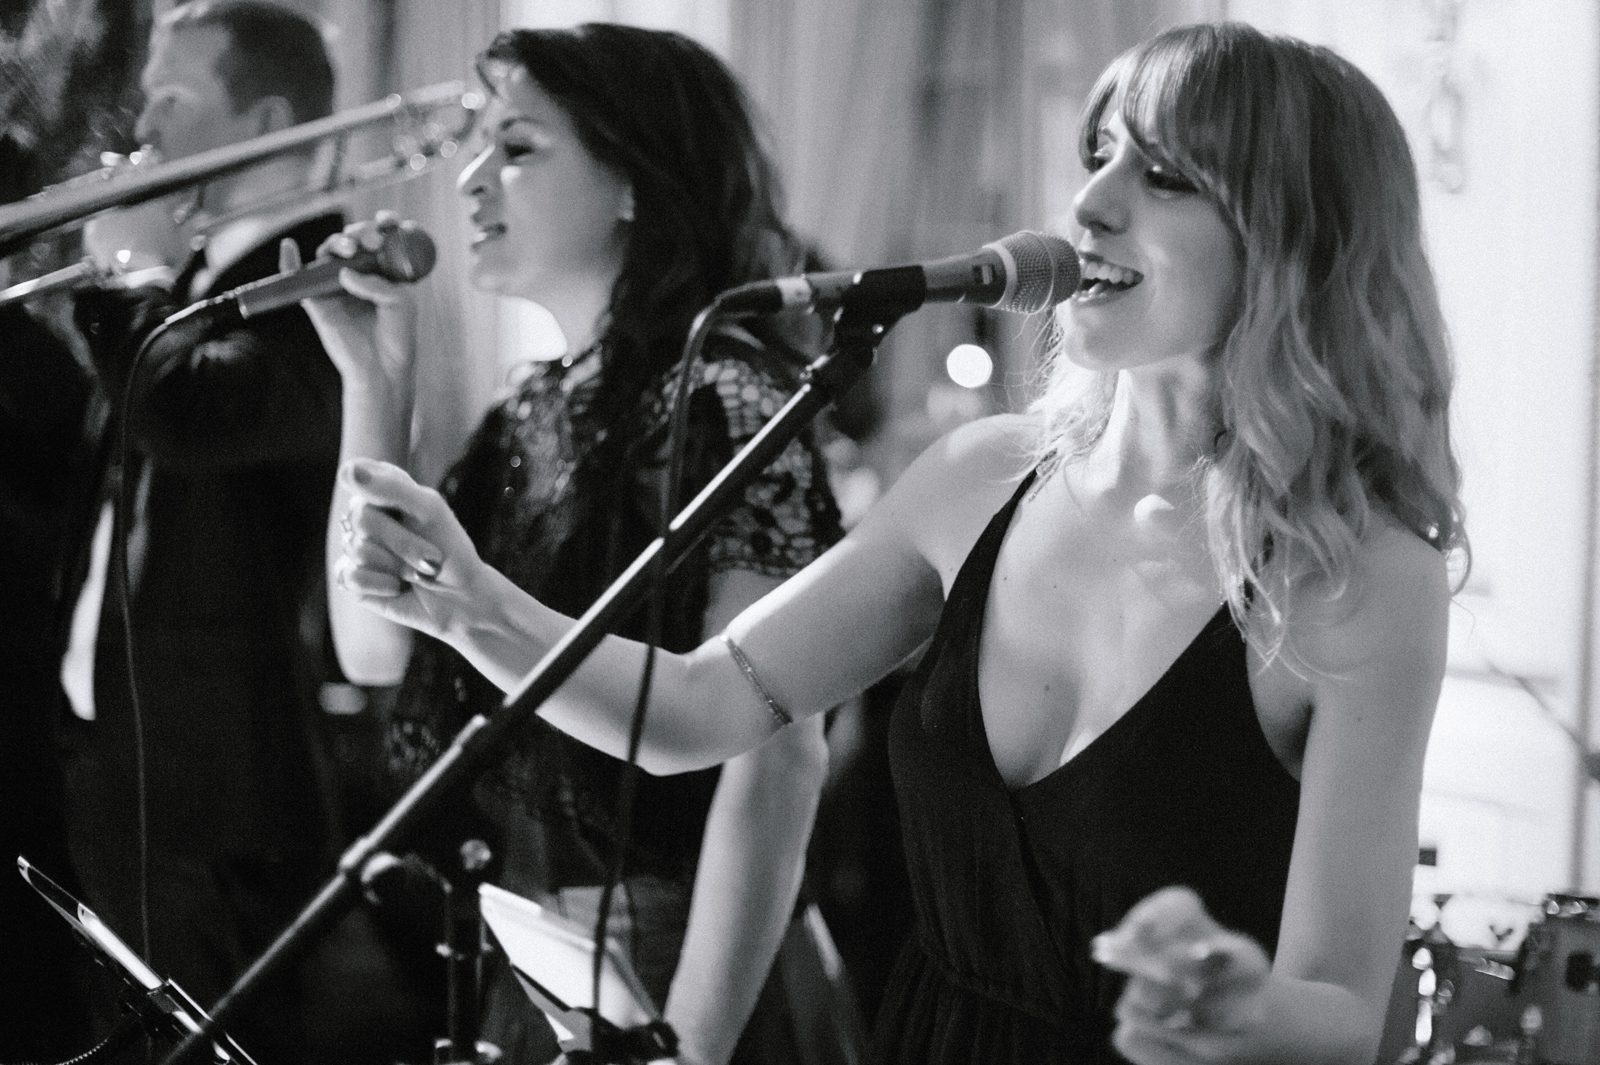 Black and white image of girls singing in the mic